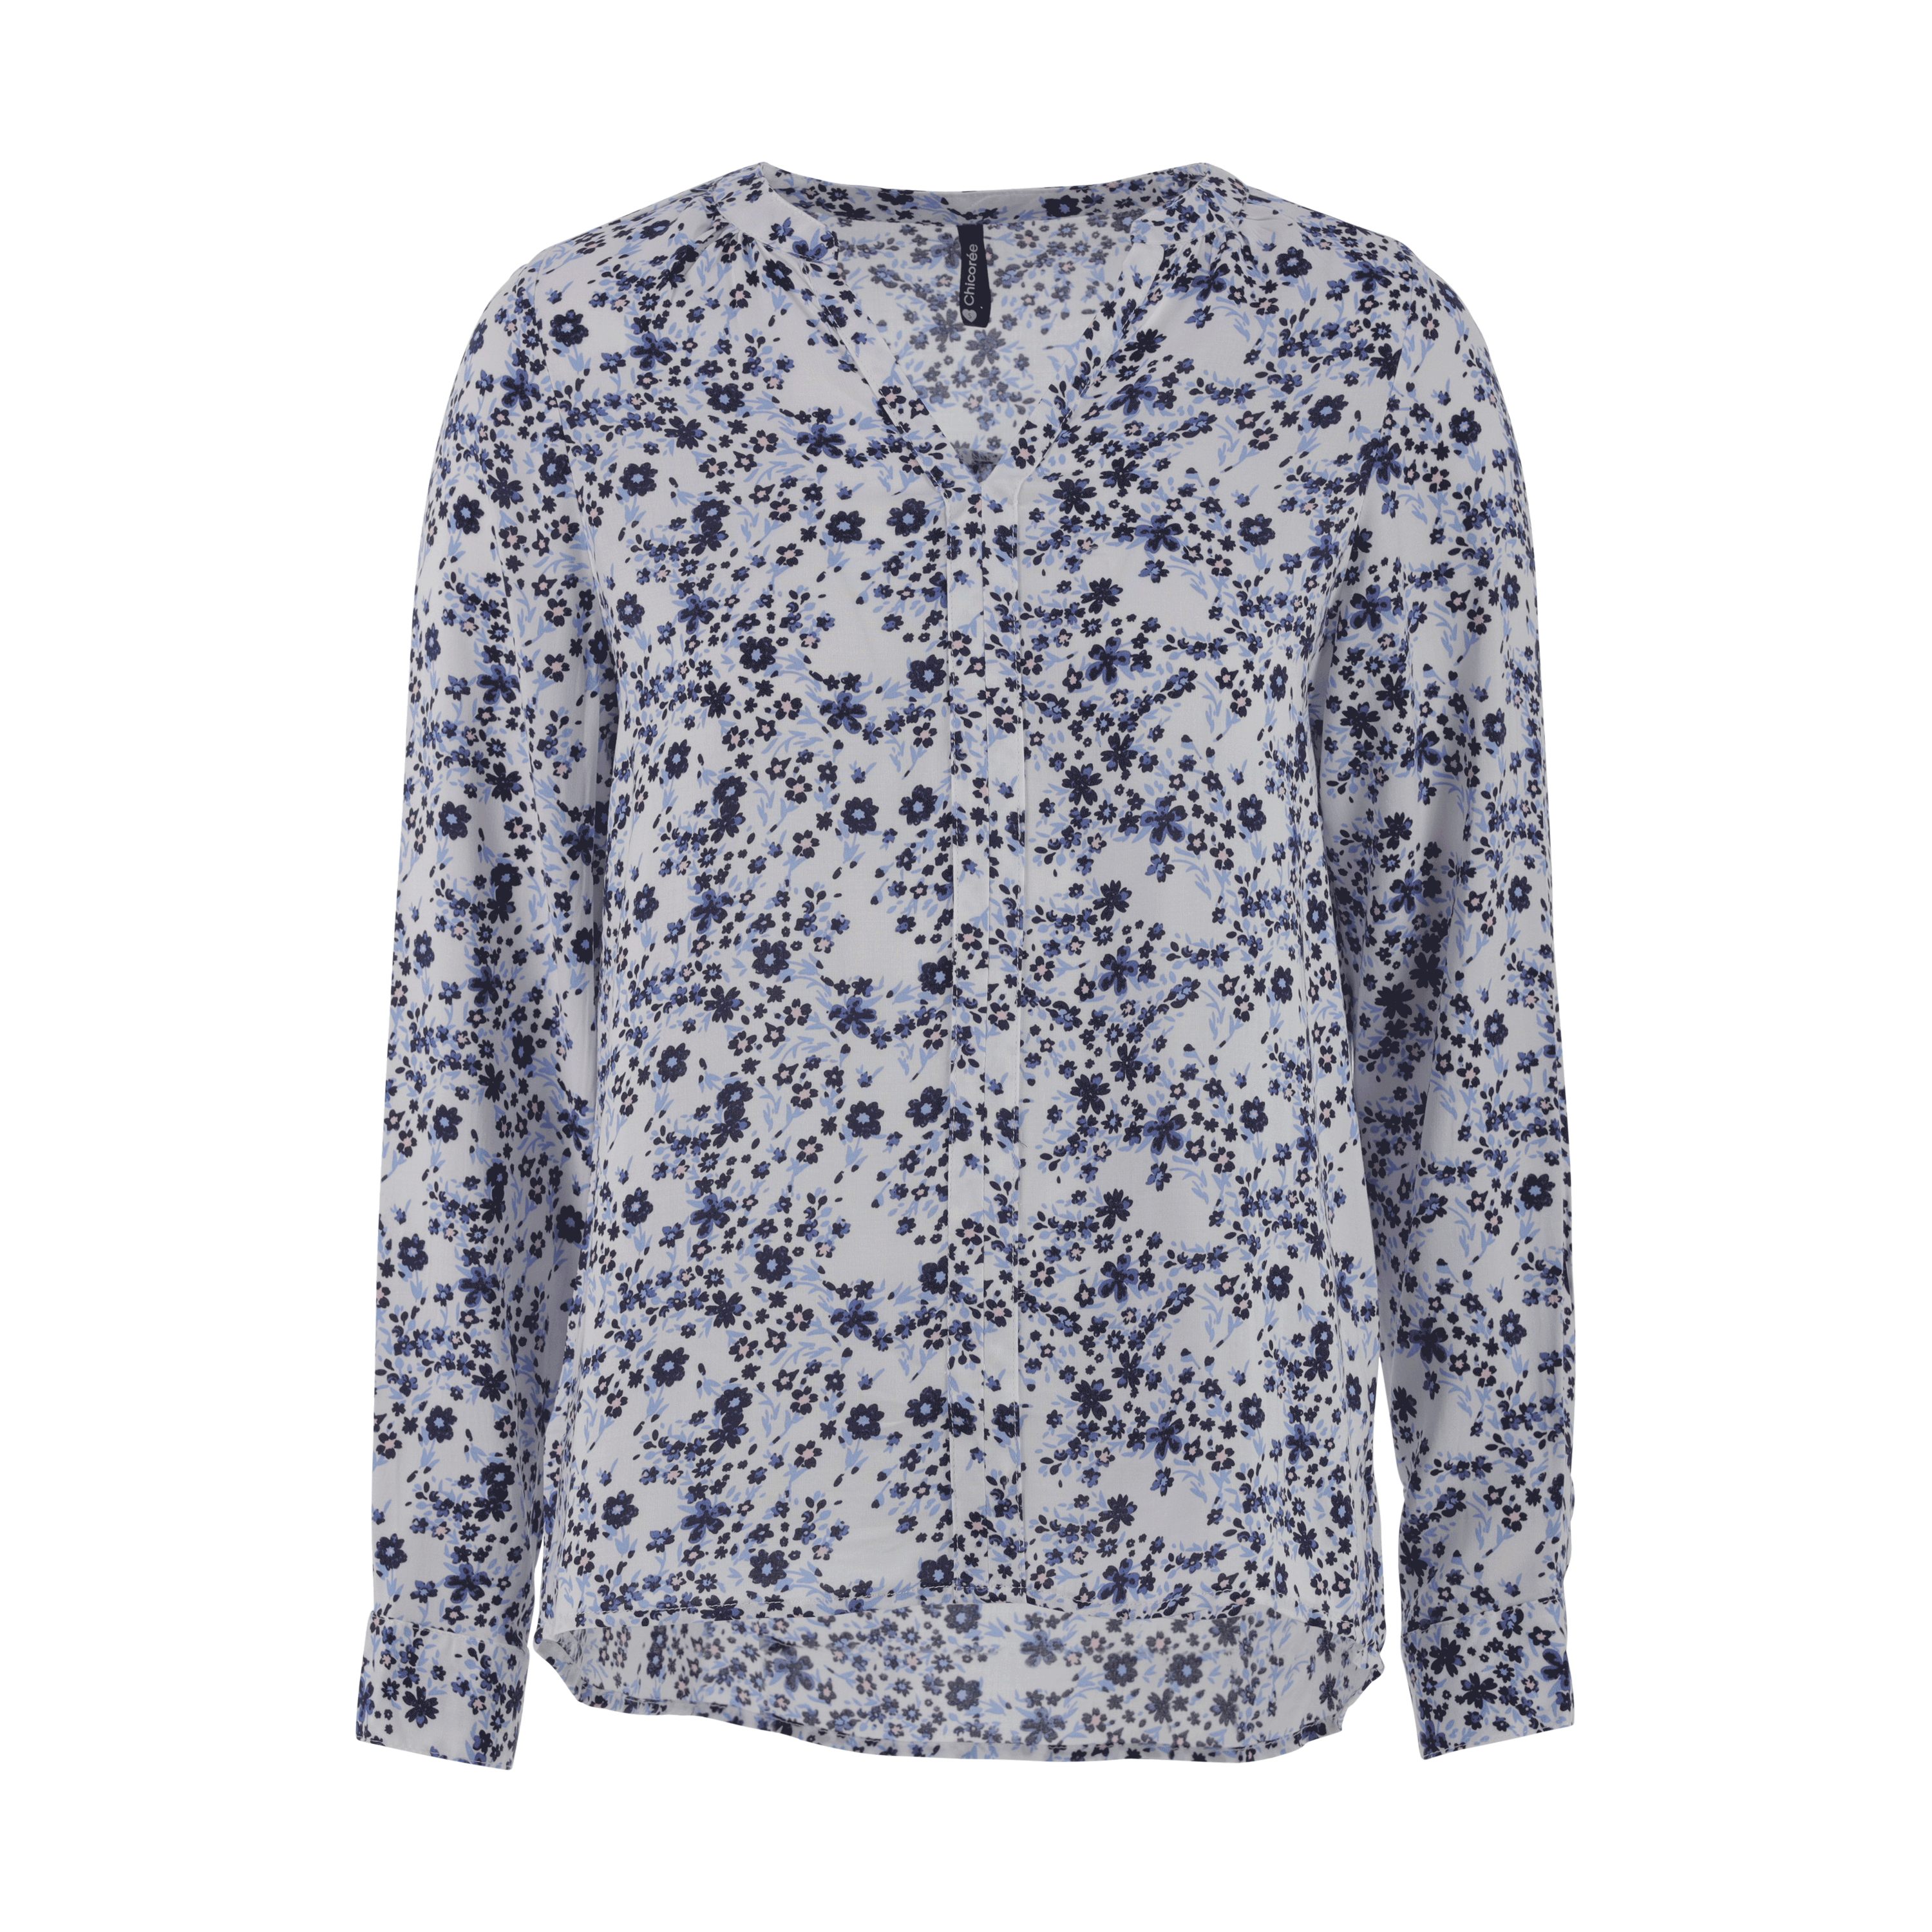 https://erp-images.chicoree.ch/products/22259560/bistol-bluse-weiss-white-22259560-01-1.png?fit=crop&crop=edges